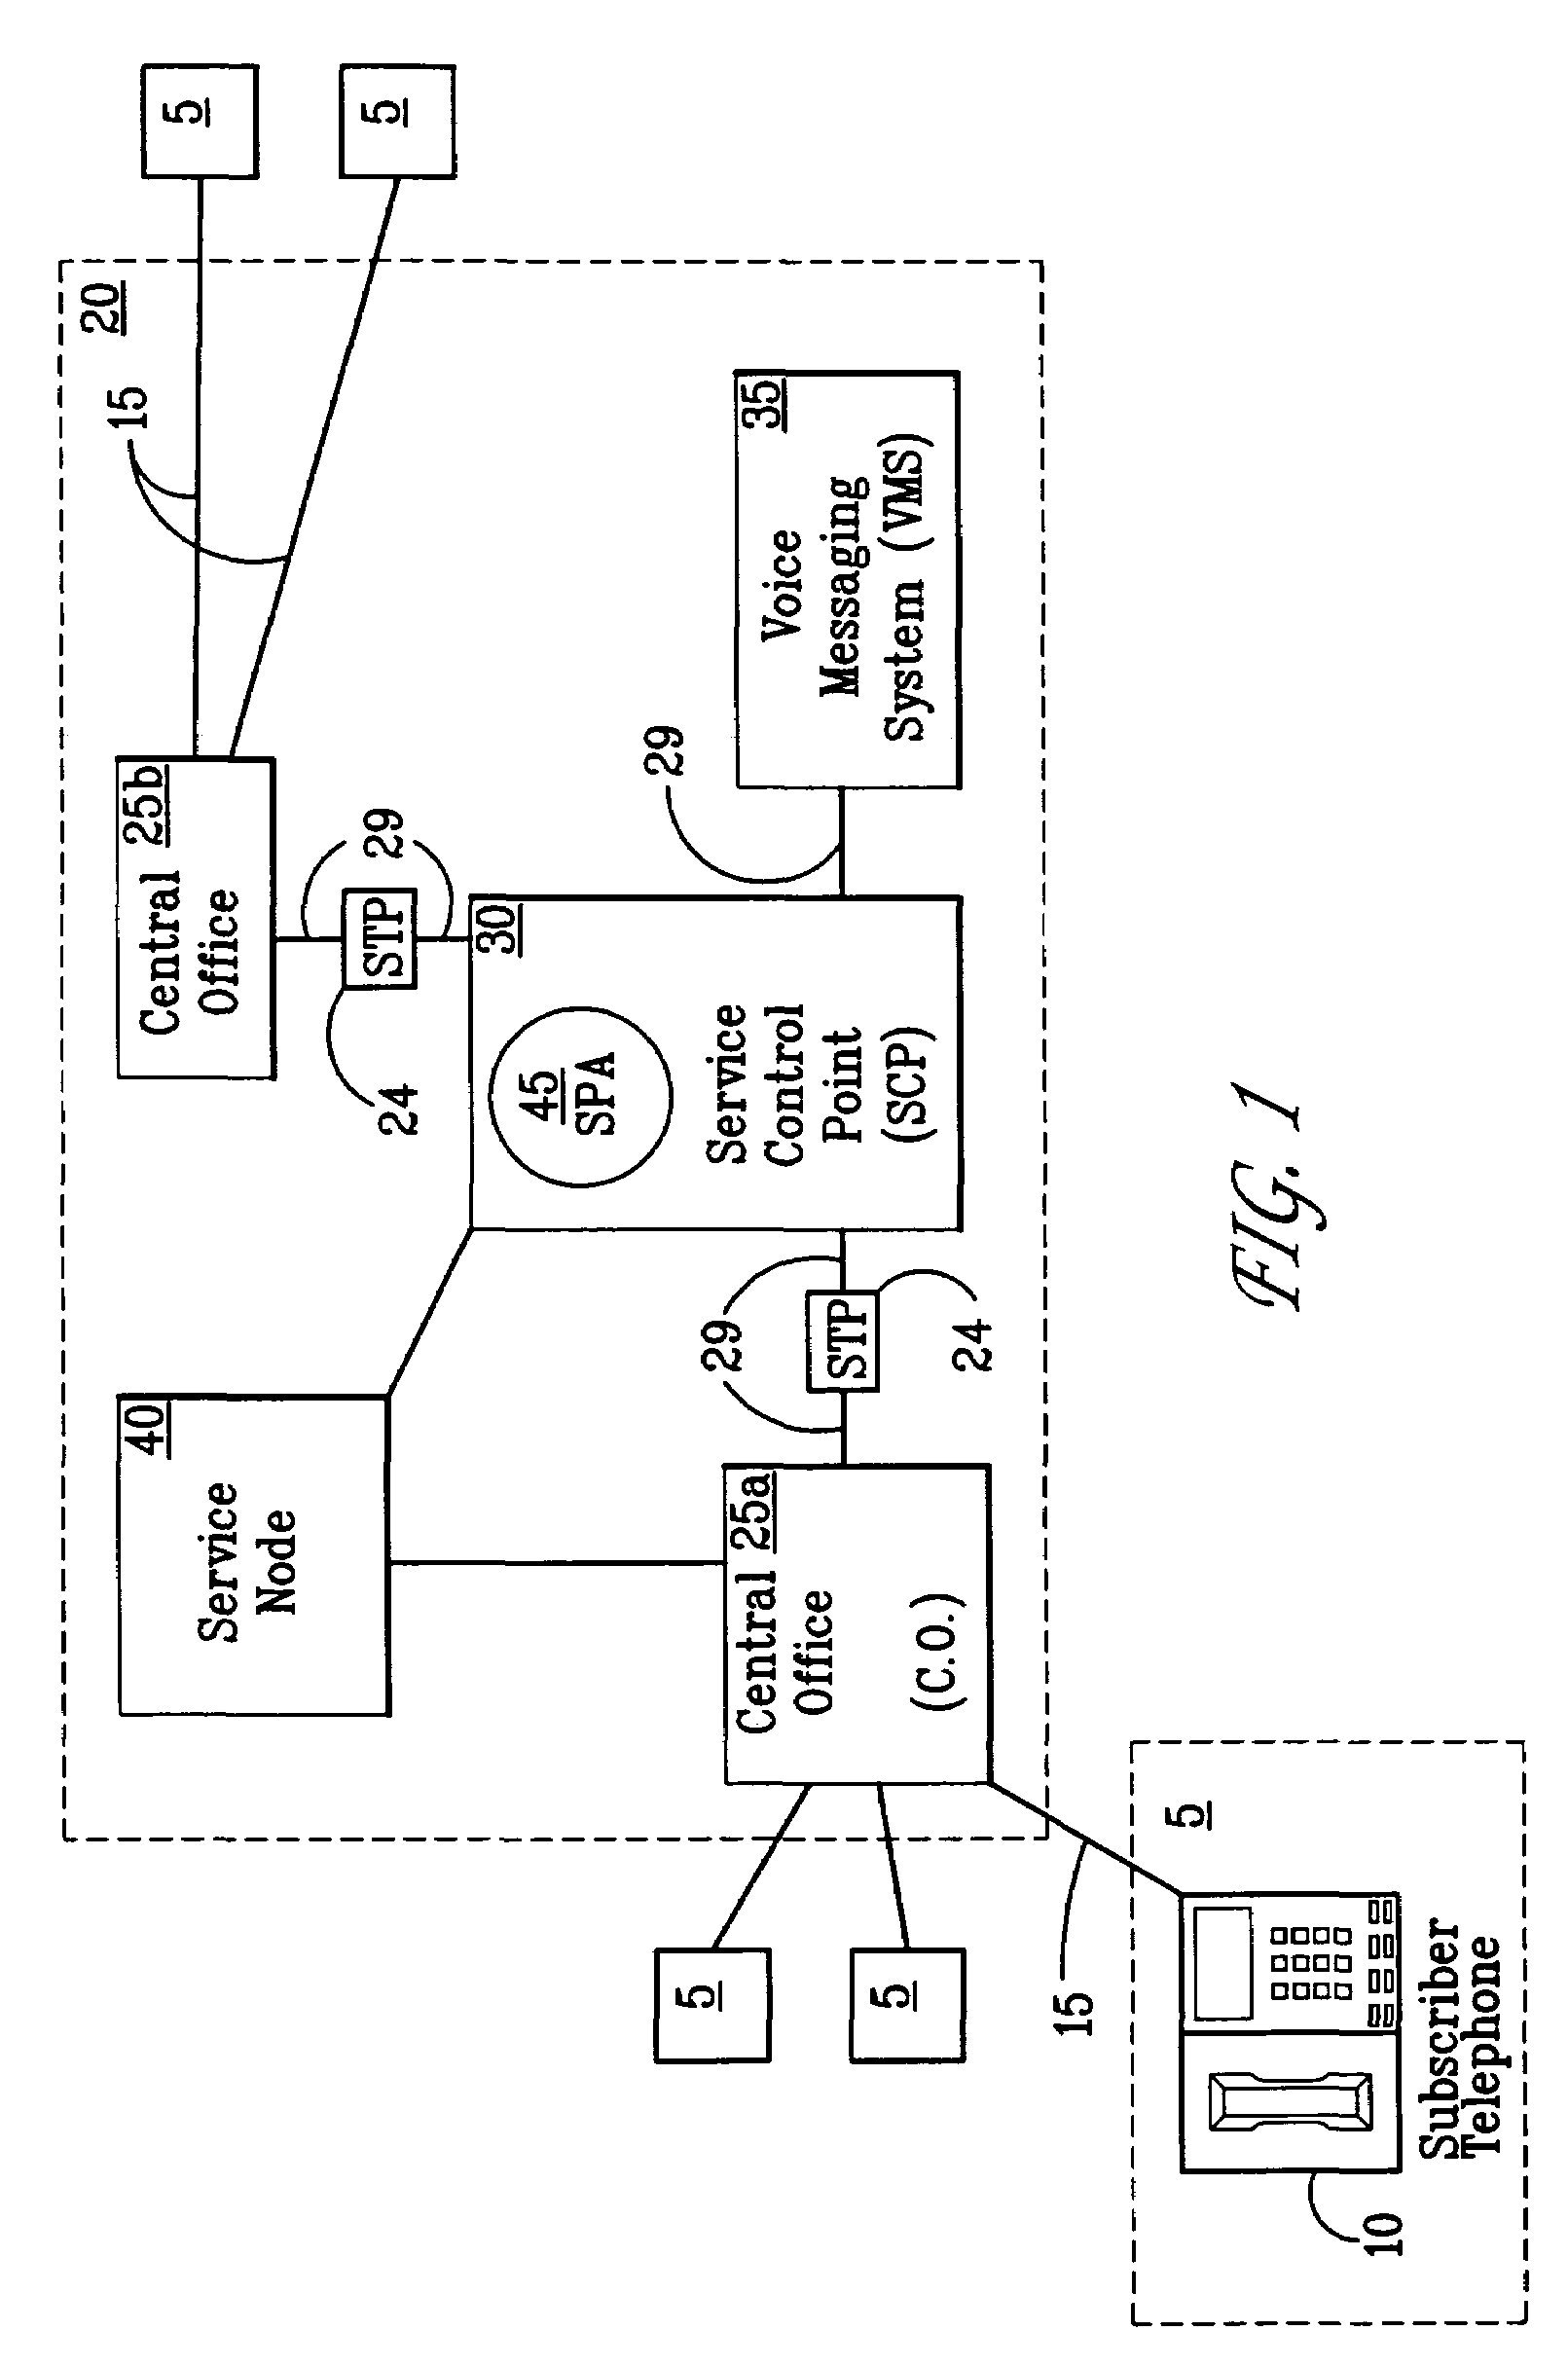 Telephone voice messaging system and method using off-hook immediate trigger